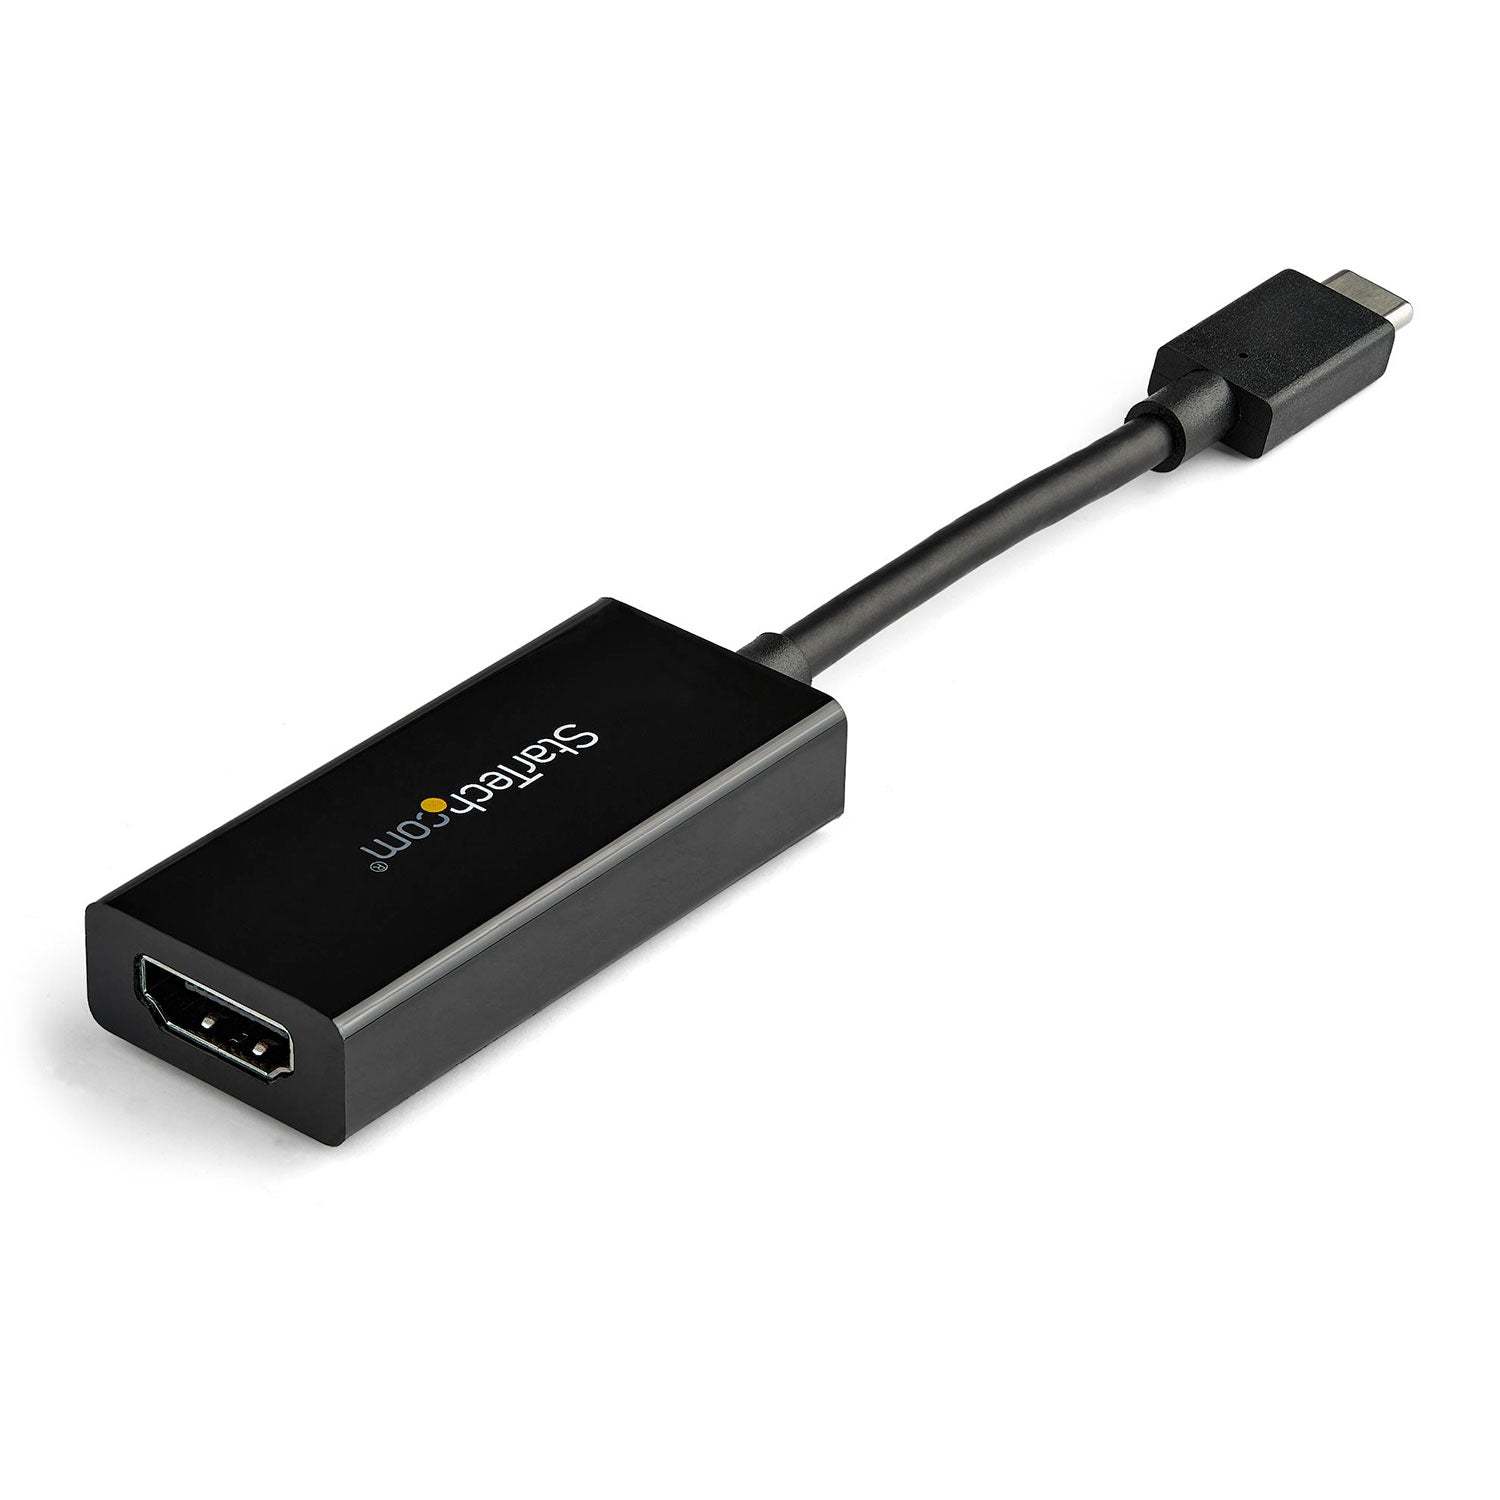 StarTech.com USB-C to HDMI Adapter with HDR